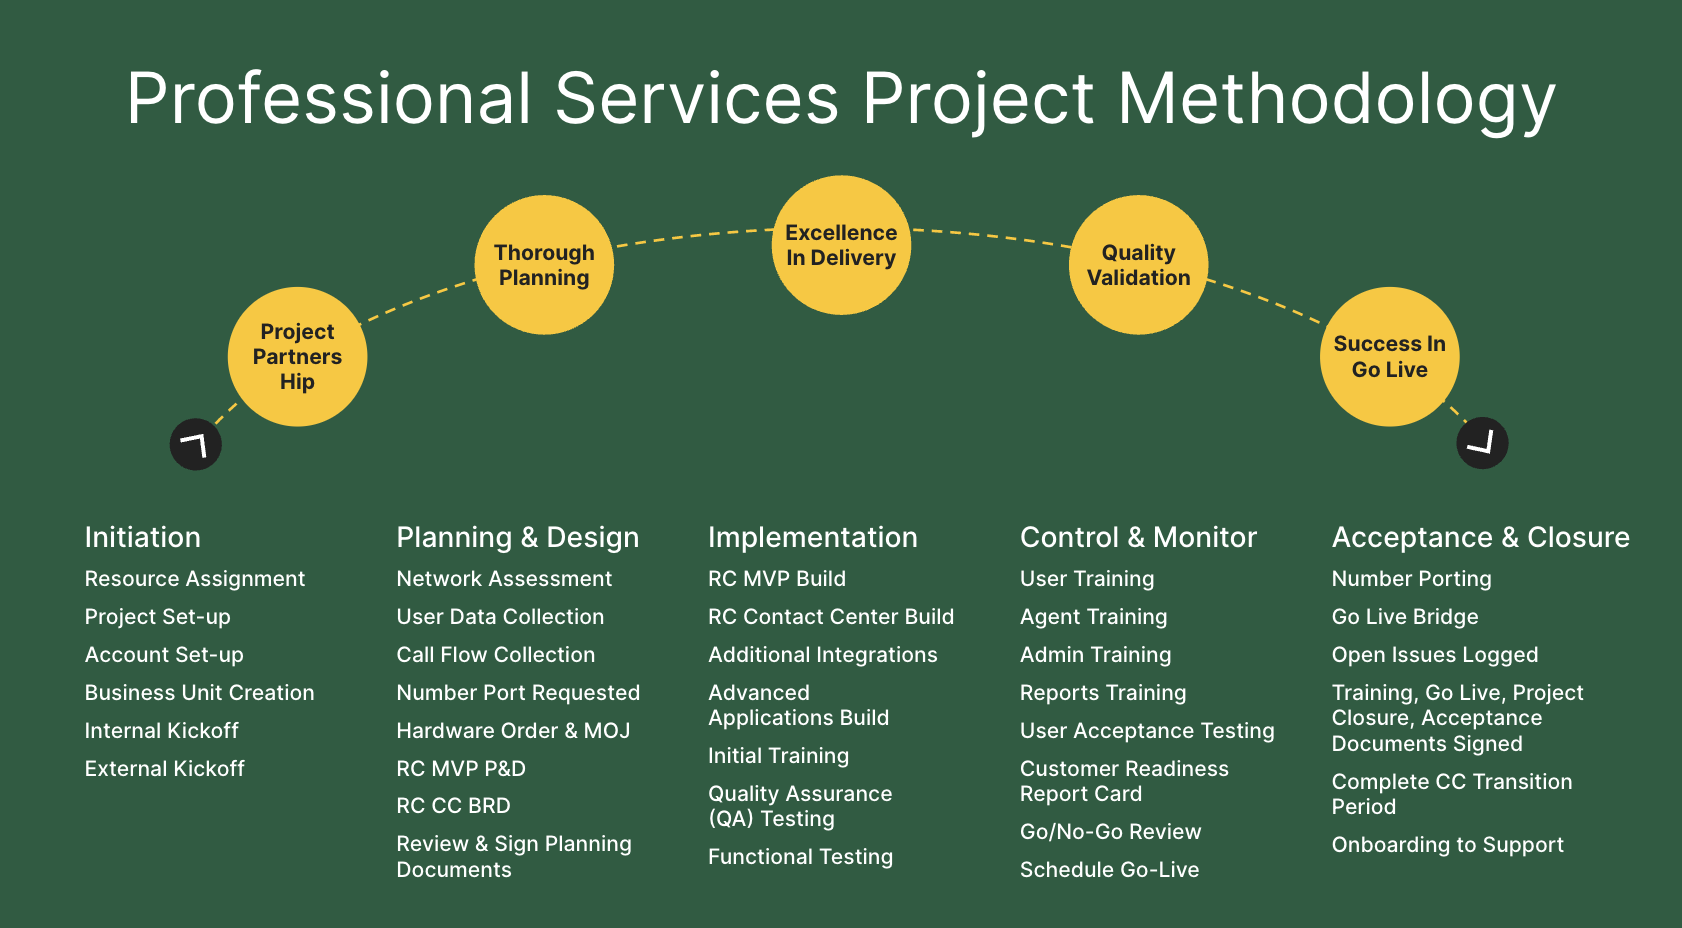 Professional Services product methodology